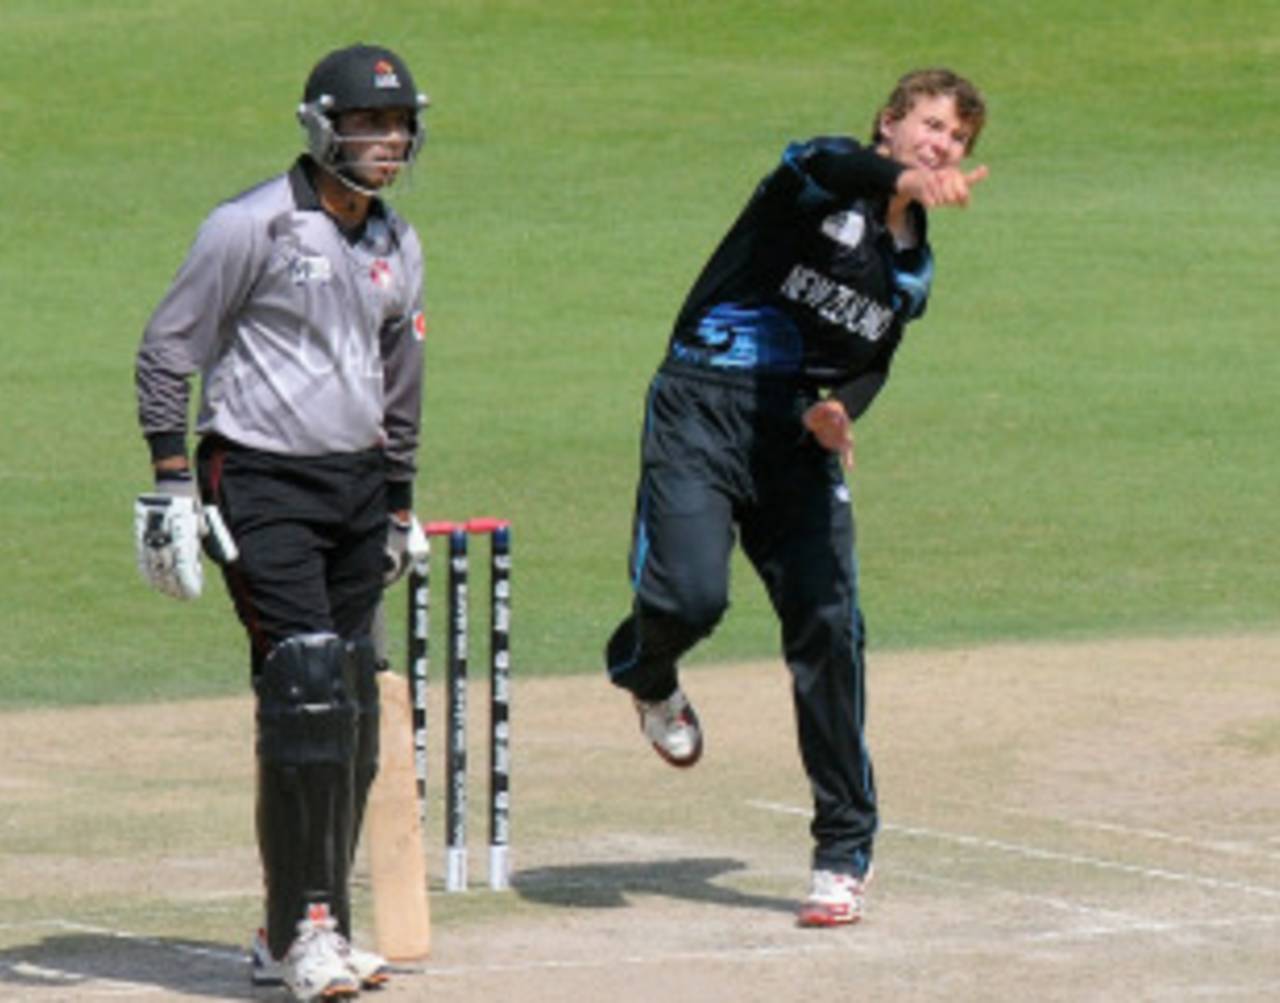 Josh Finnie picked up two wickets in his three overs to help restrict UAE to 140&nbsp;&nbsp;&bull;&nbsp;&nbsp;ICC